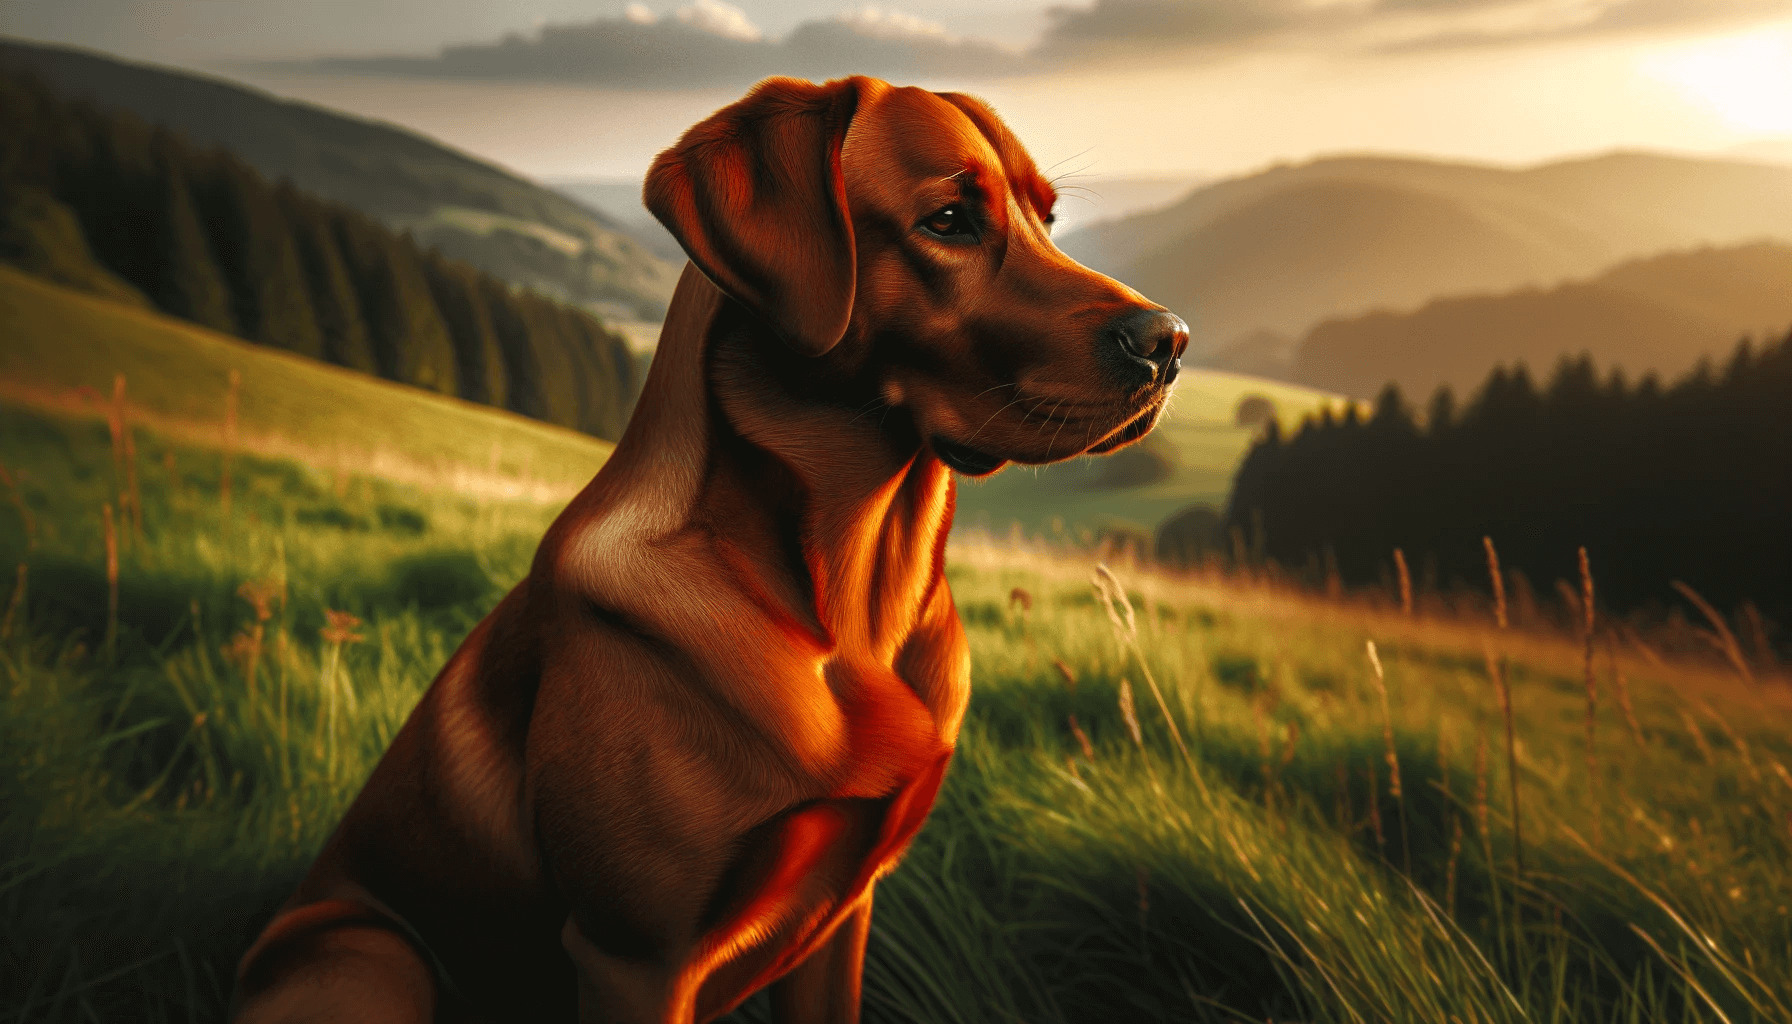 Red Fox Labrador Retriever in a profile view sitting on a lush green meadow